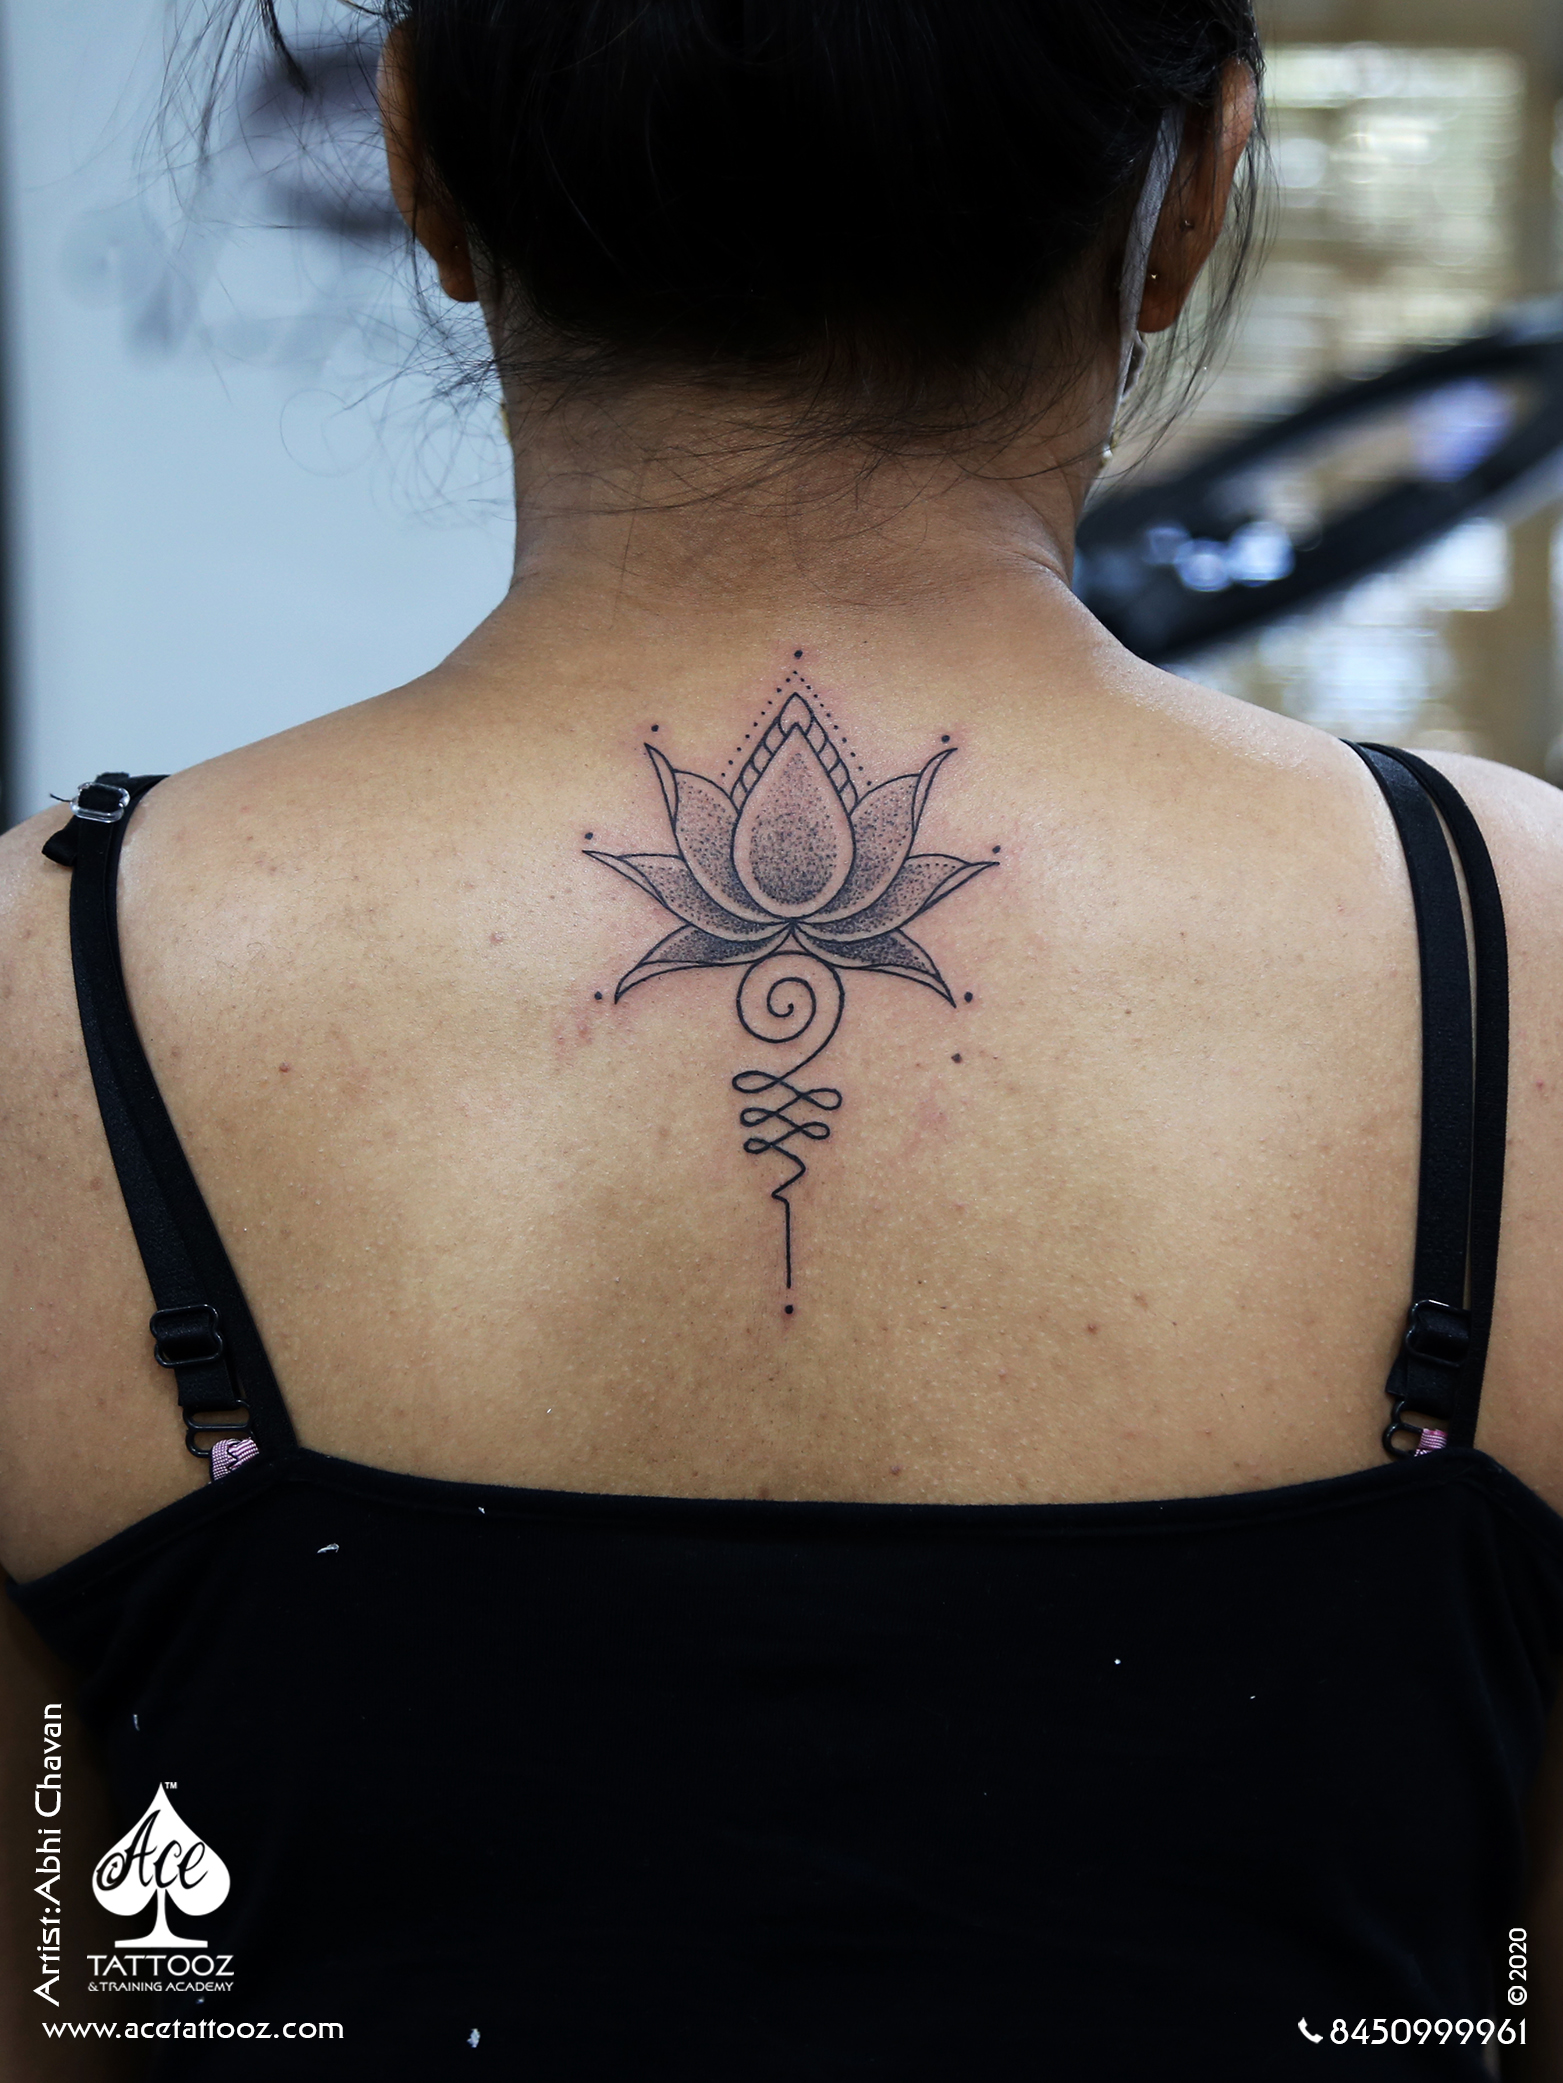 Can i get this tattoo on my back? Are there any flaws in it? : r/hinduism